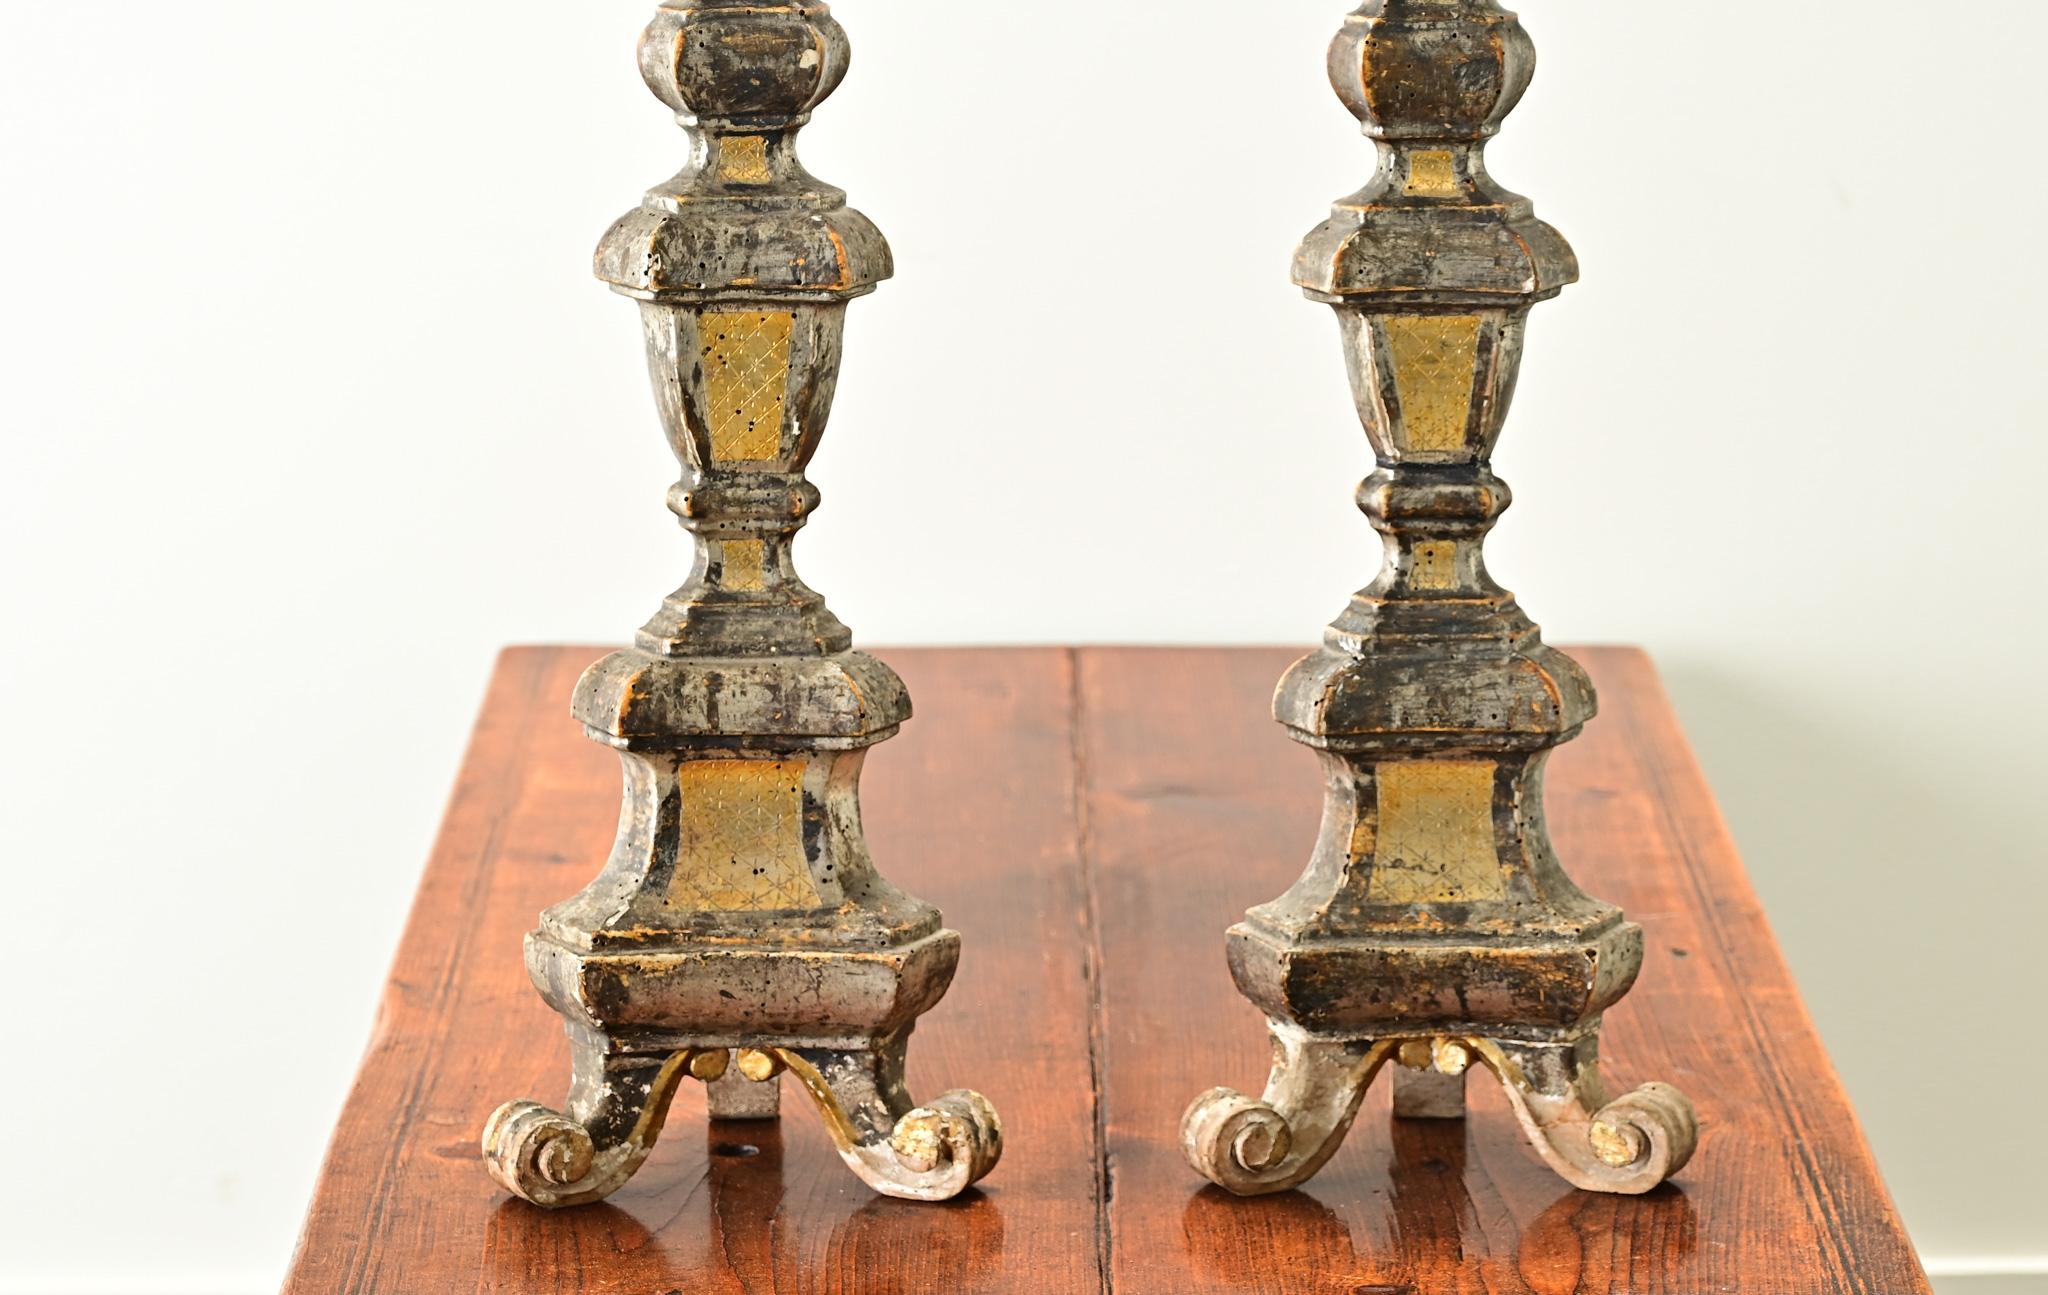 Hand-Carved Pair of 16th Century Italian Gilt Candlesticks For Sale